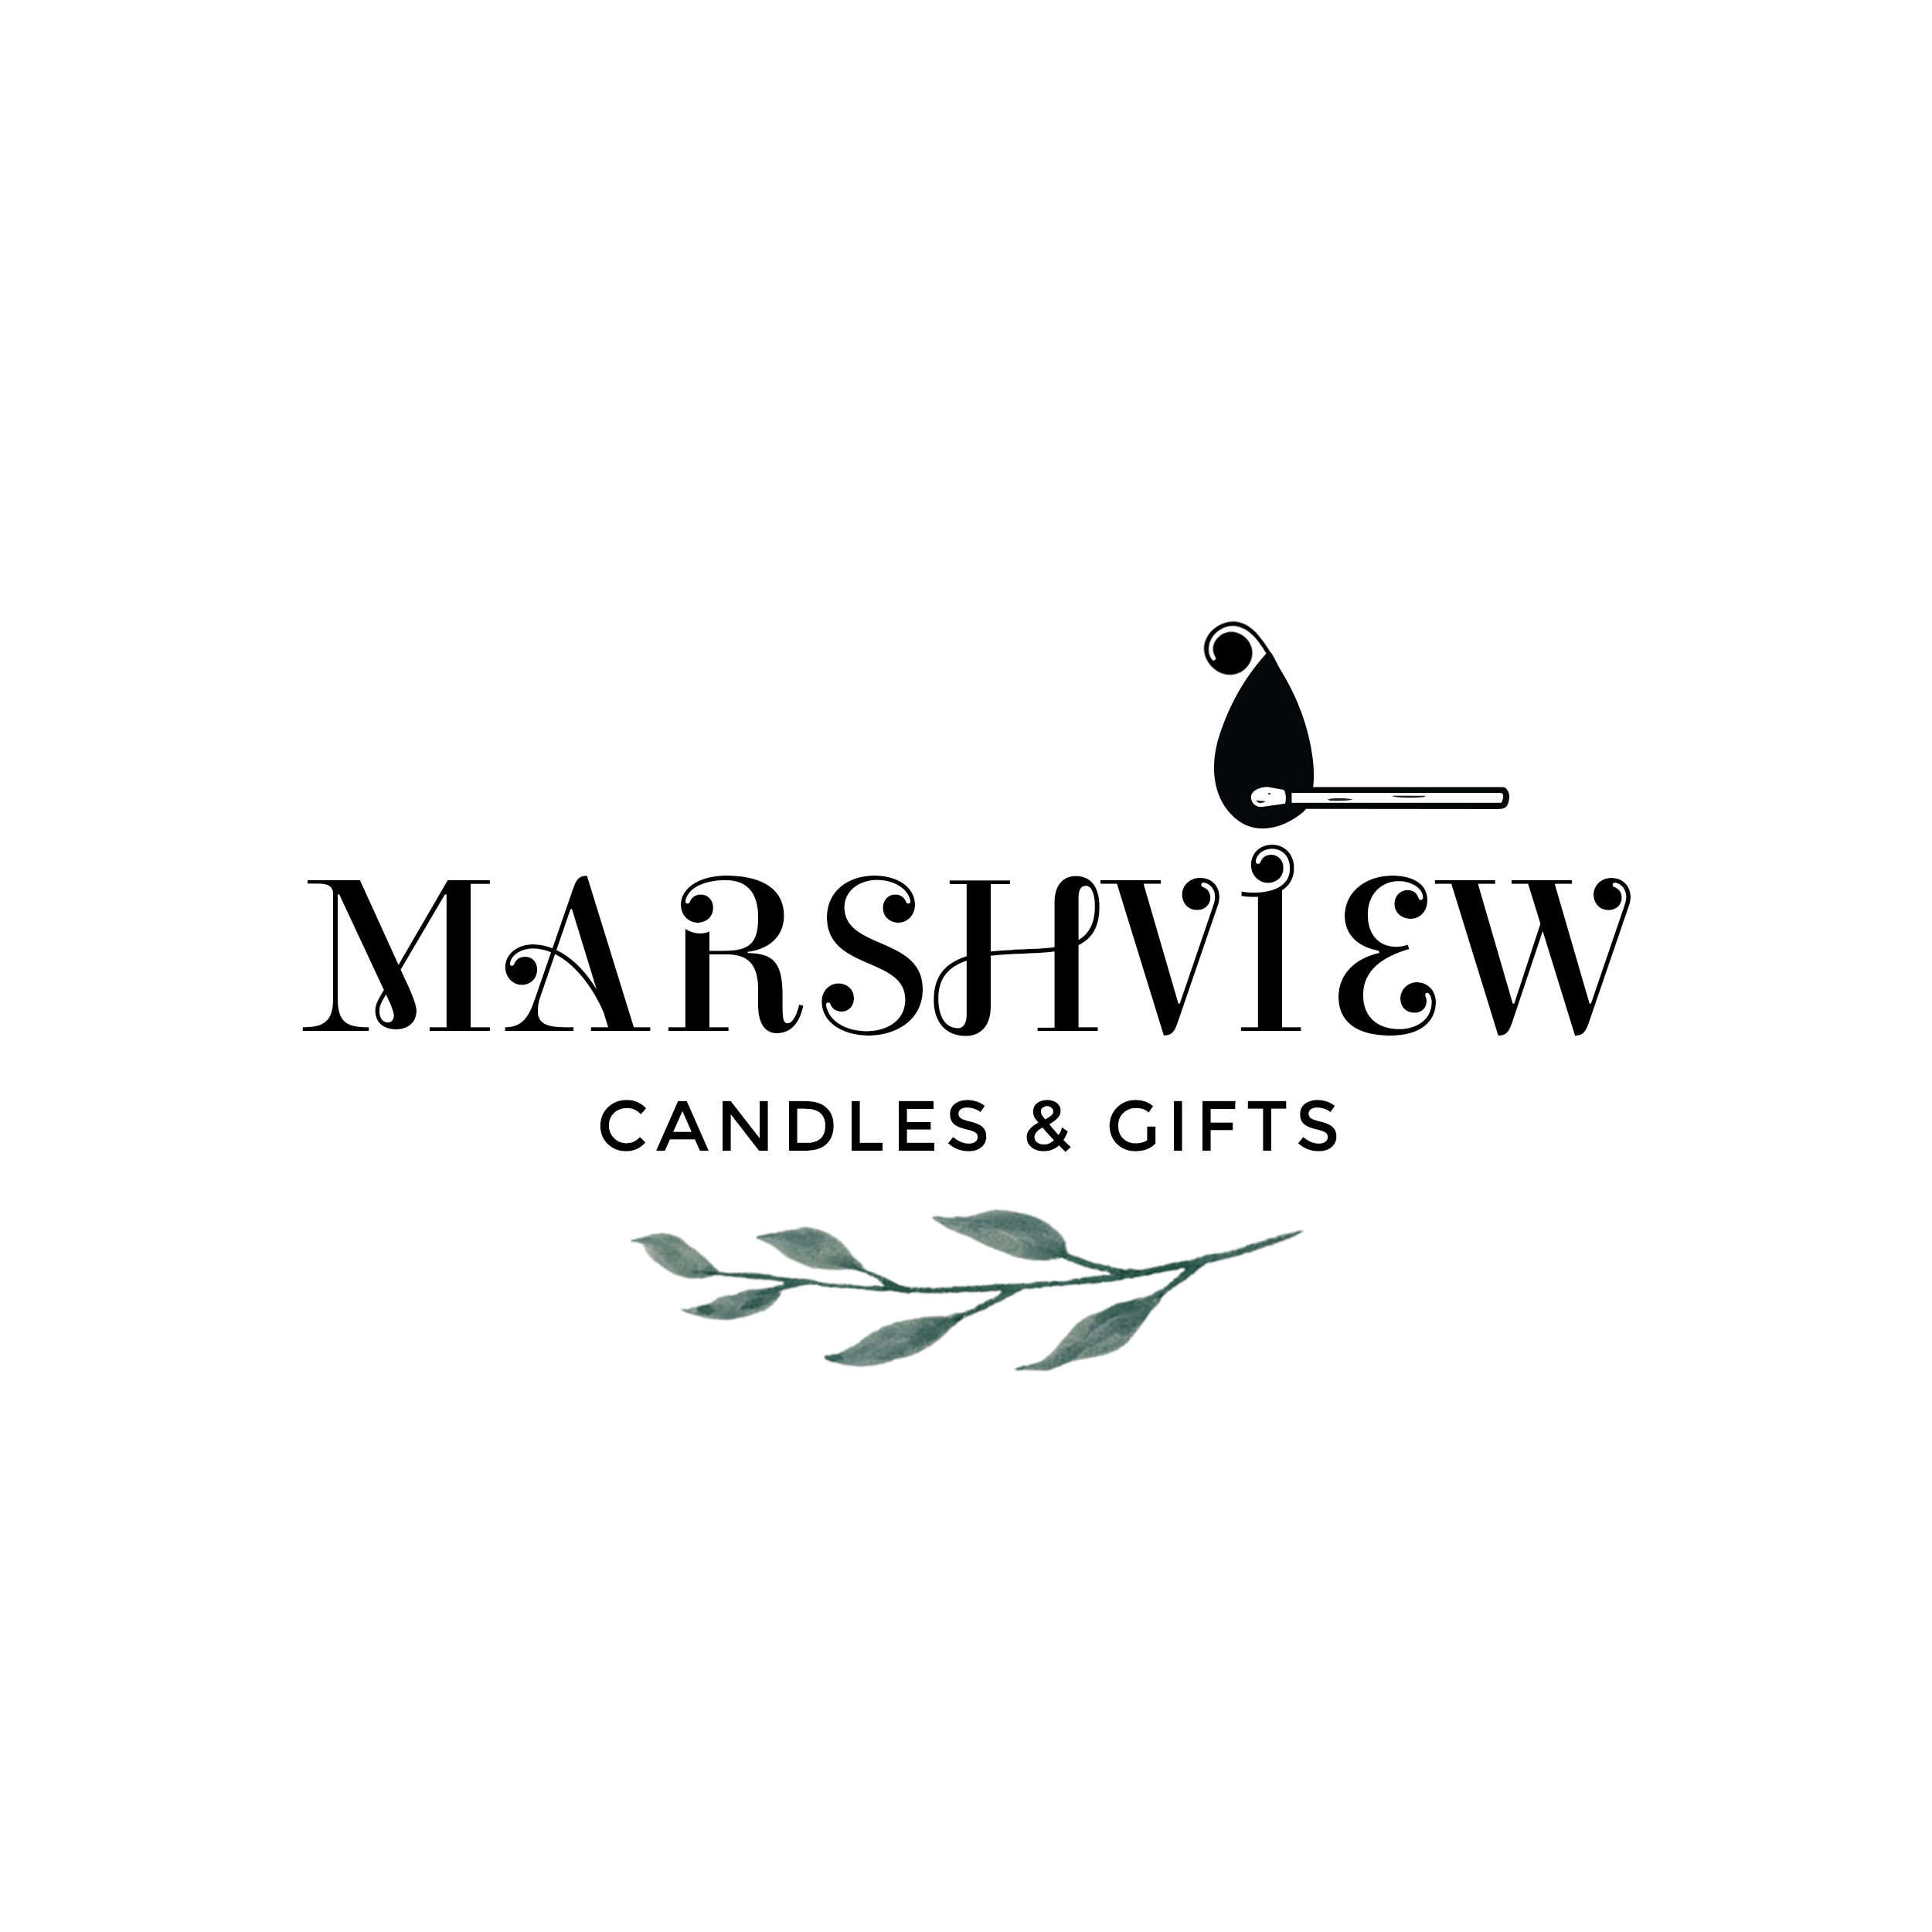 Marsh View Candles &. Gifts